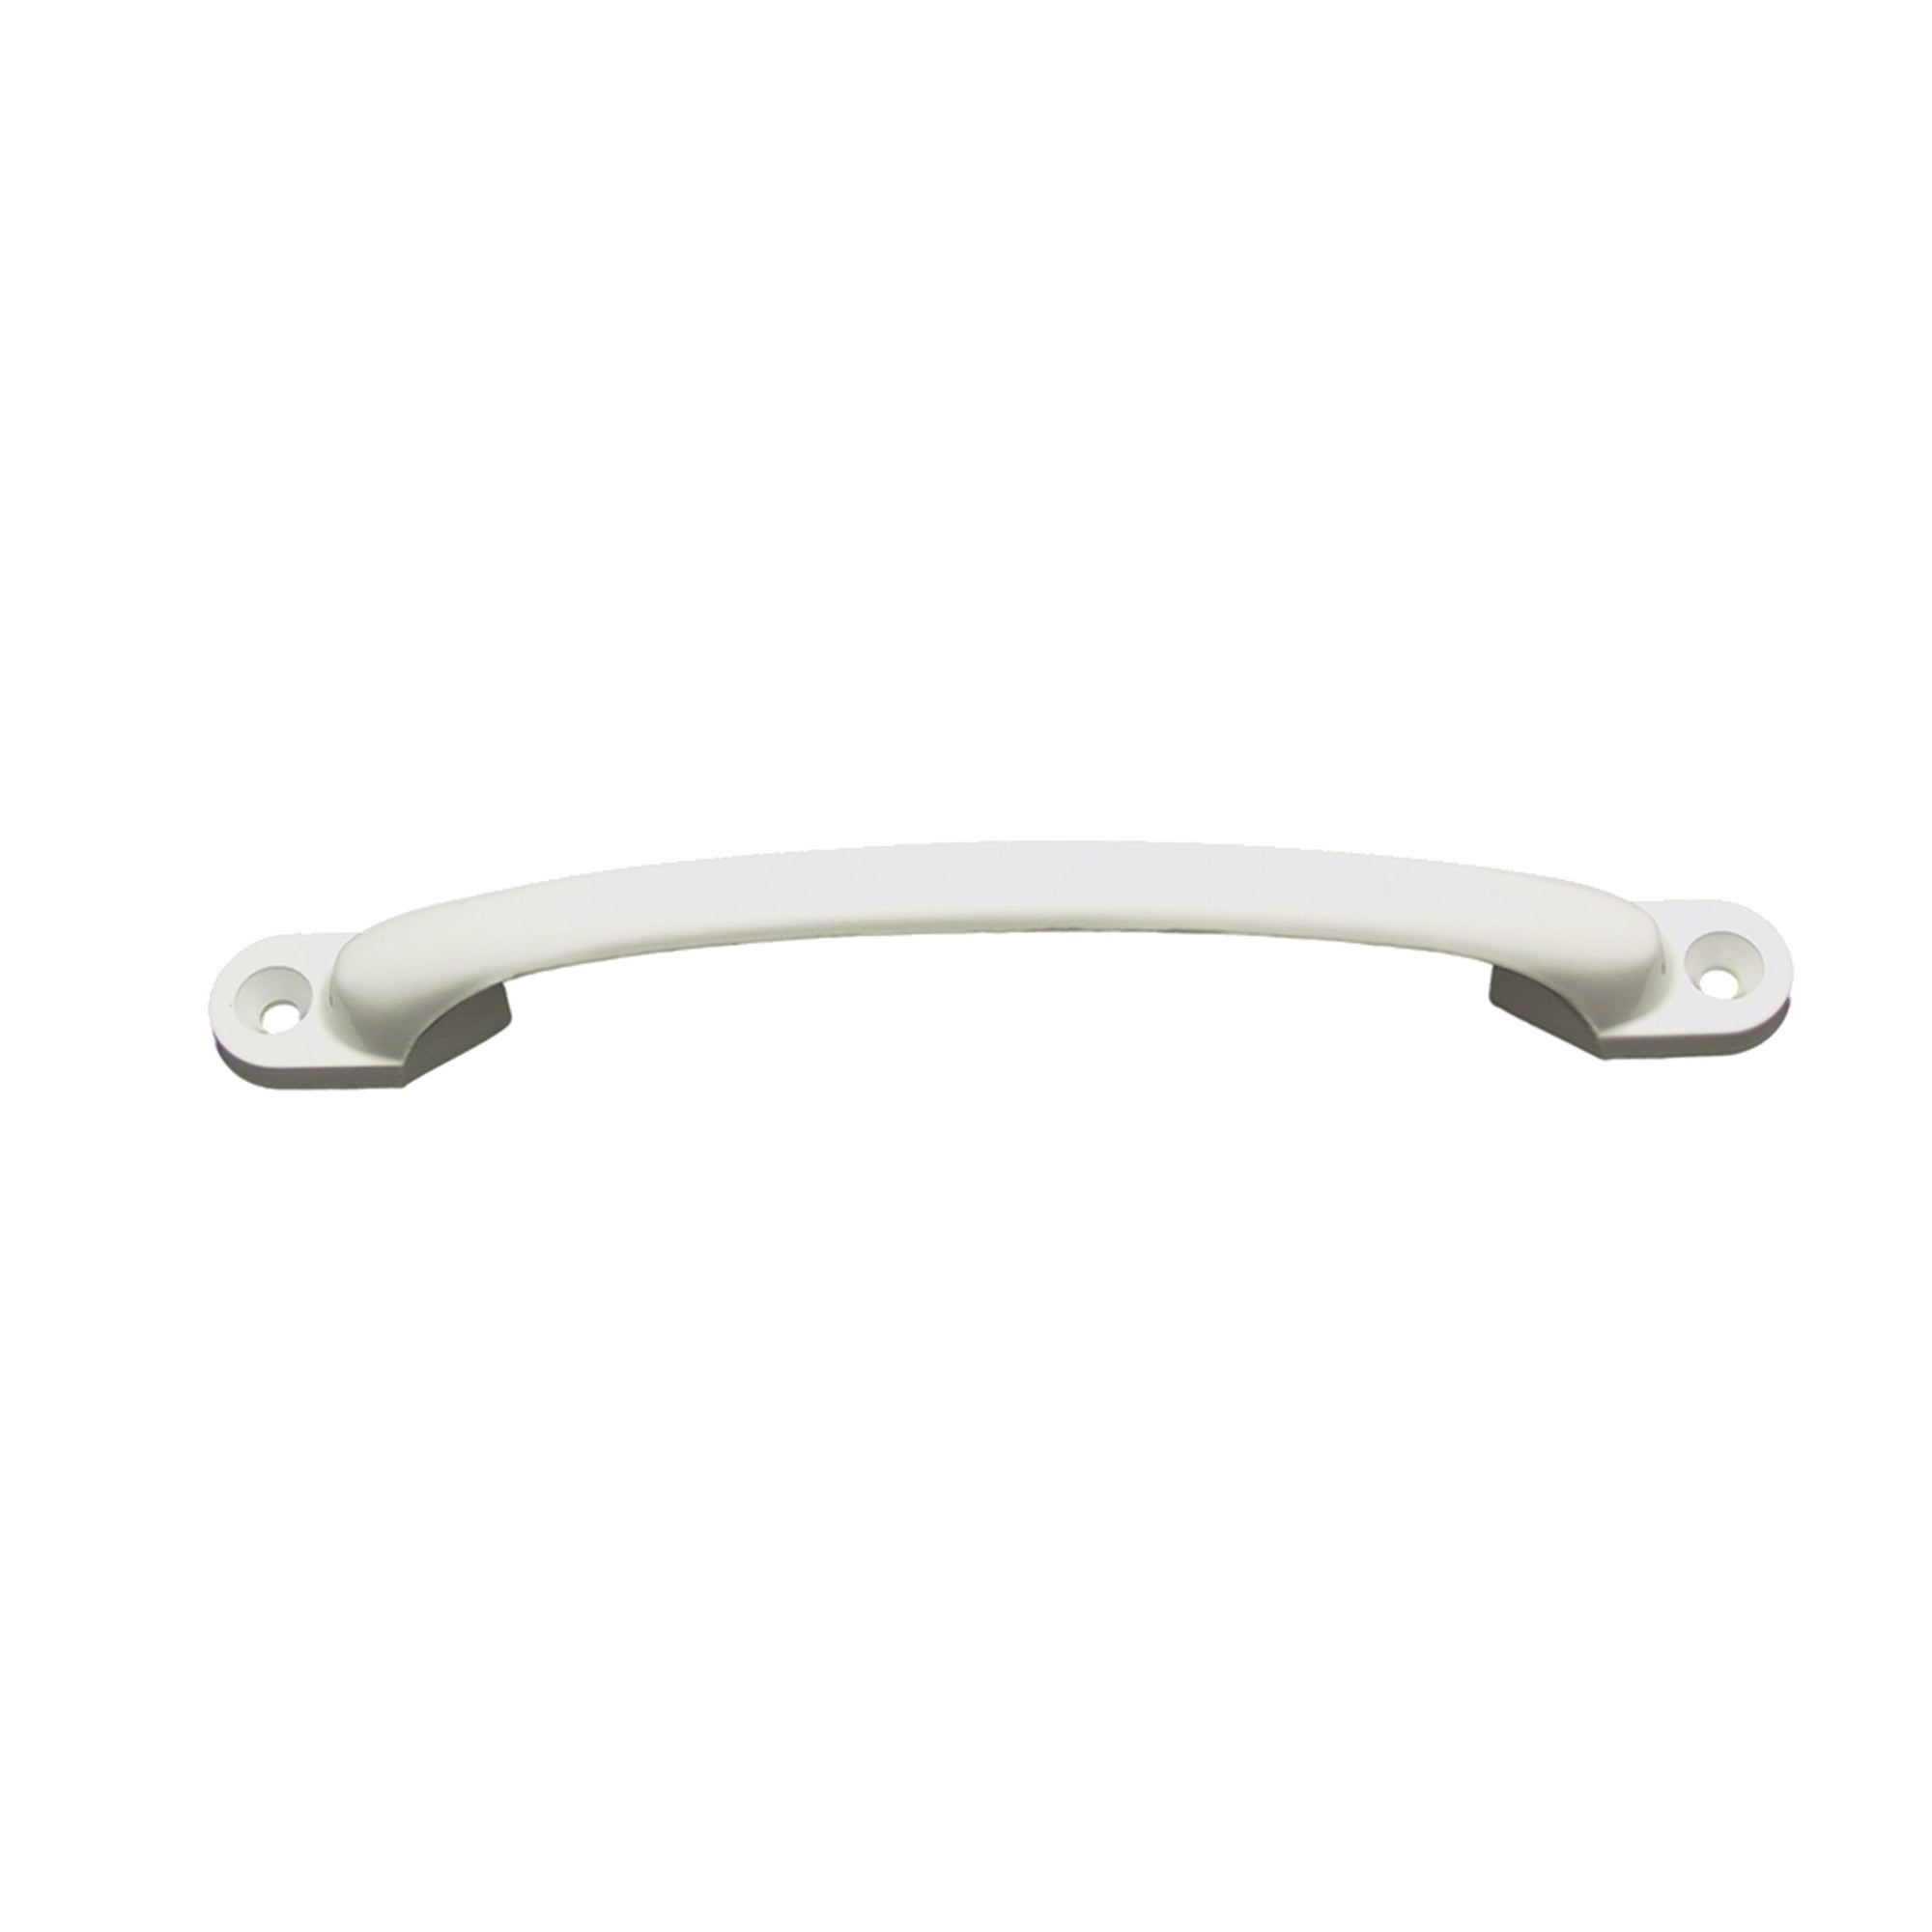 JR Products 9482-000-111 Powder Coated Steel Assist Handle - White